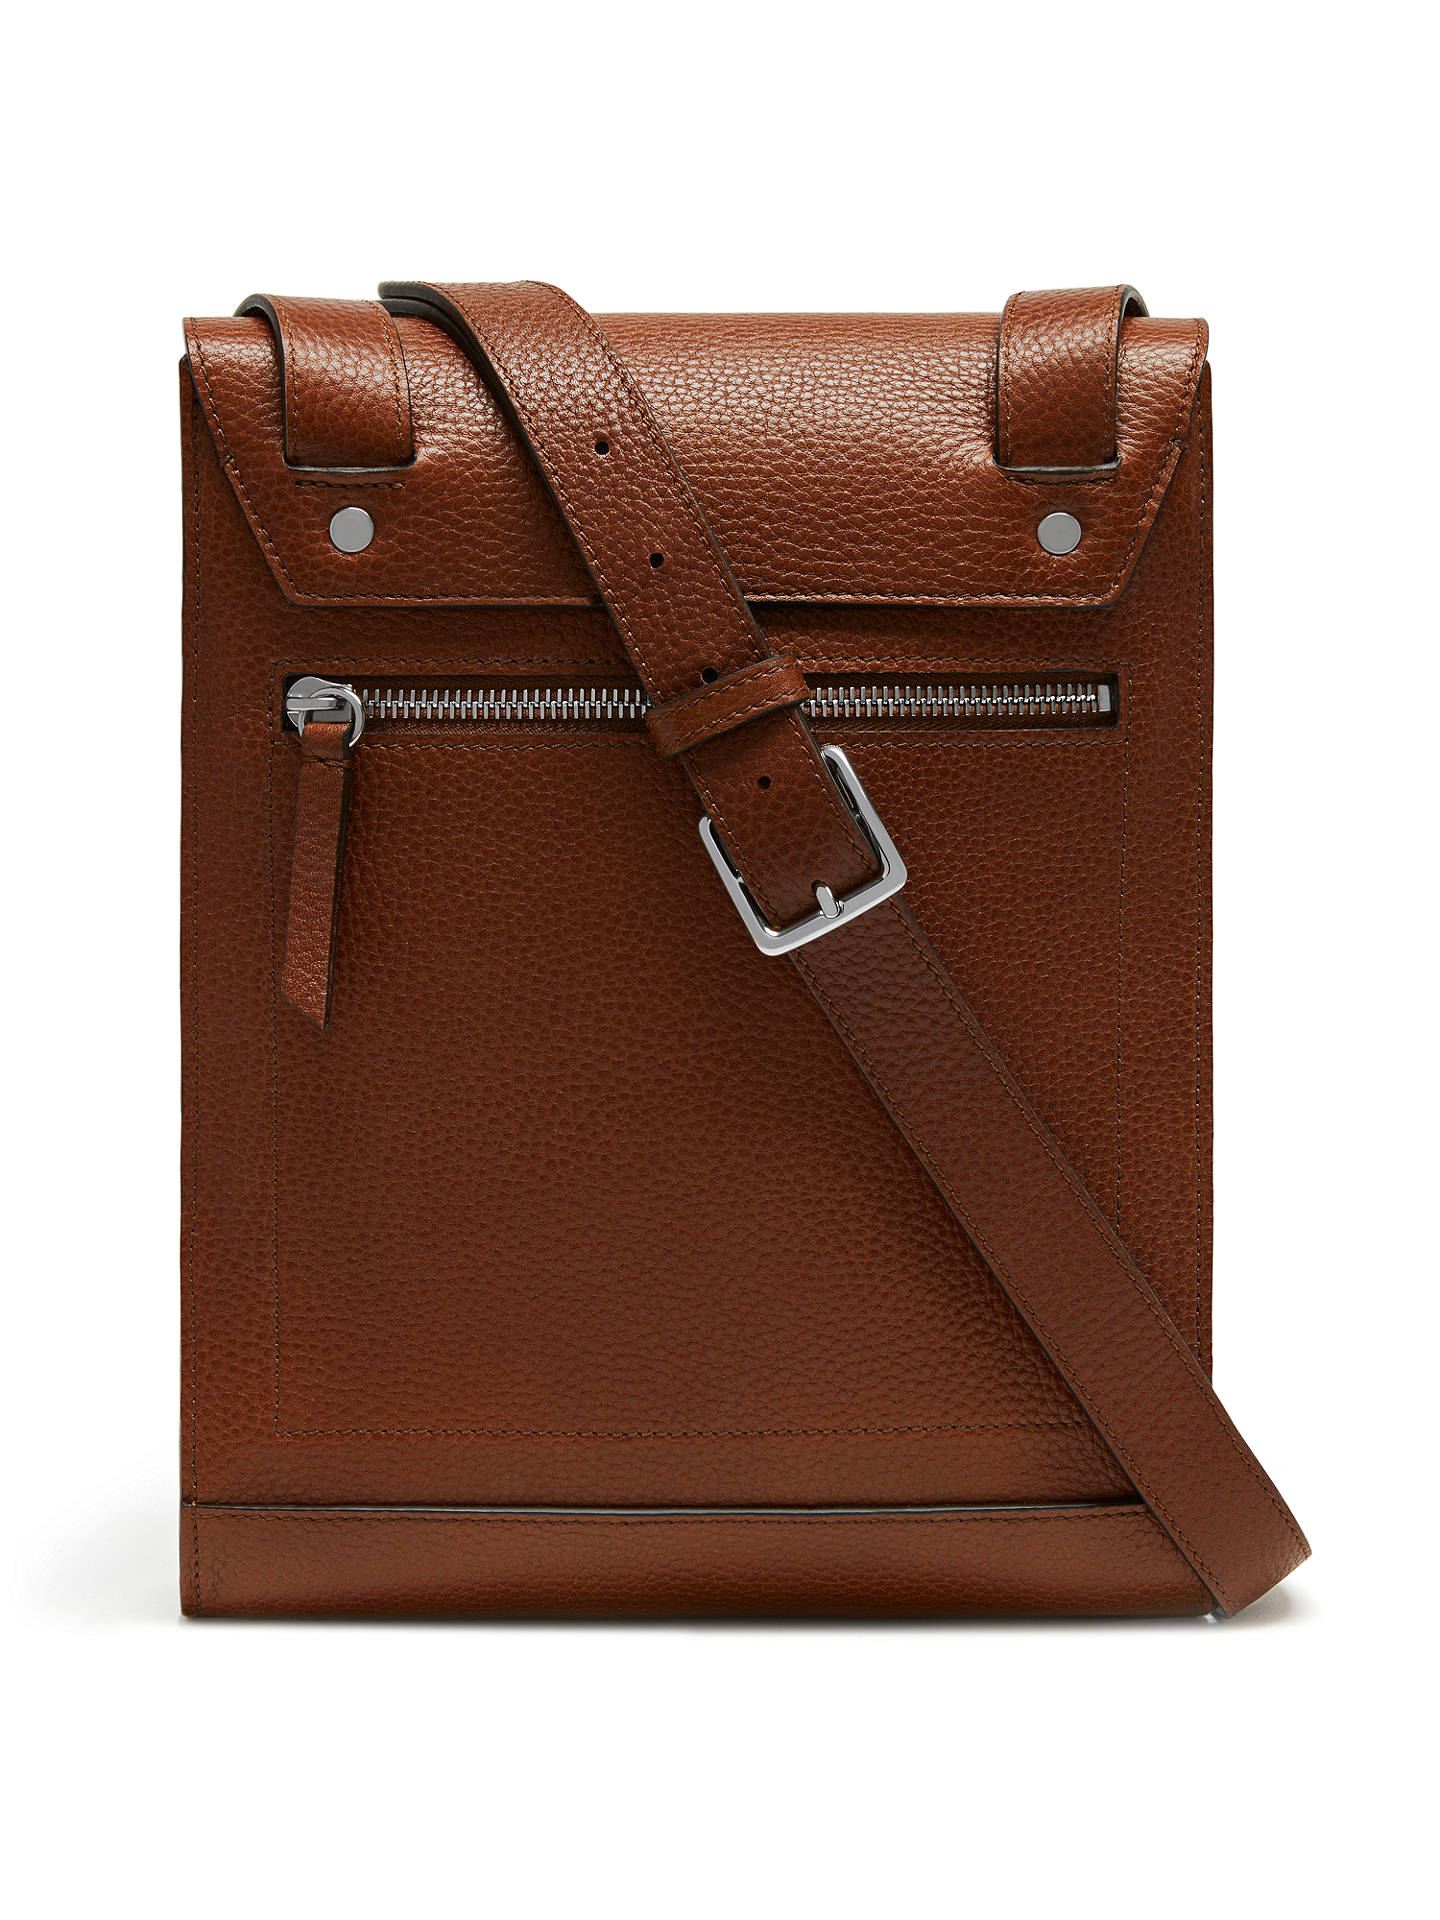 Mulberry Chiltern Small Buckle Messenger, Oak at John Lewis & Partners